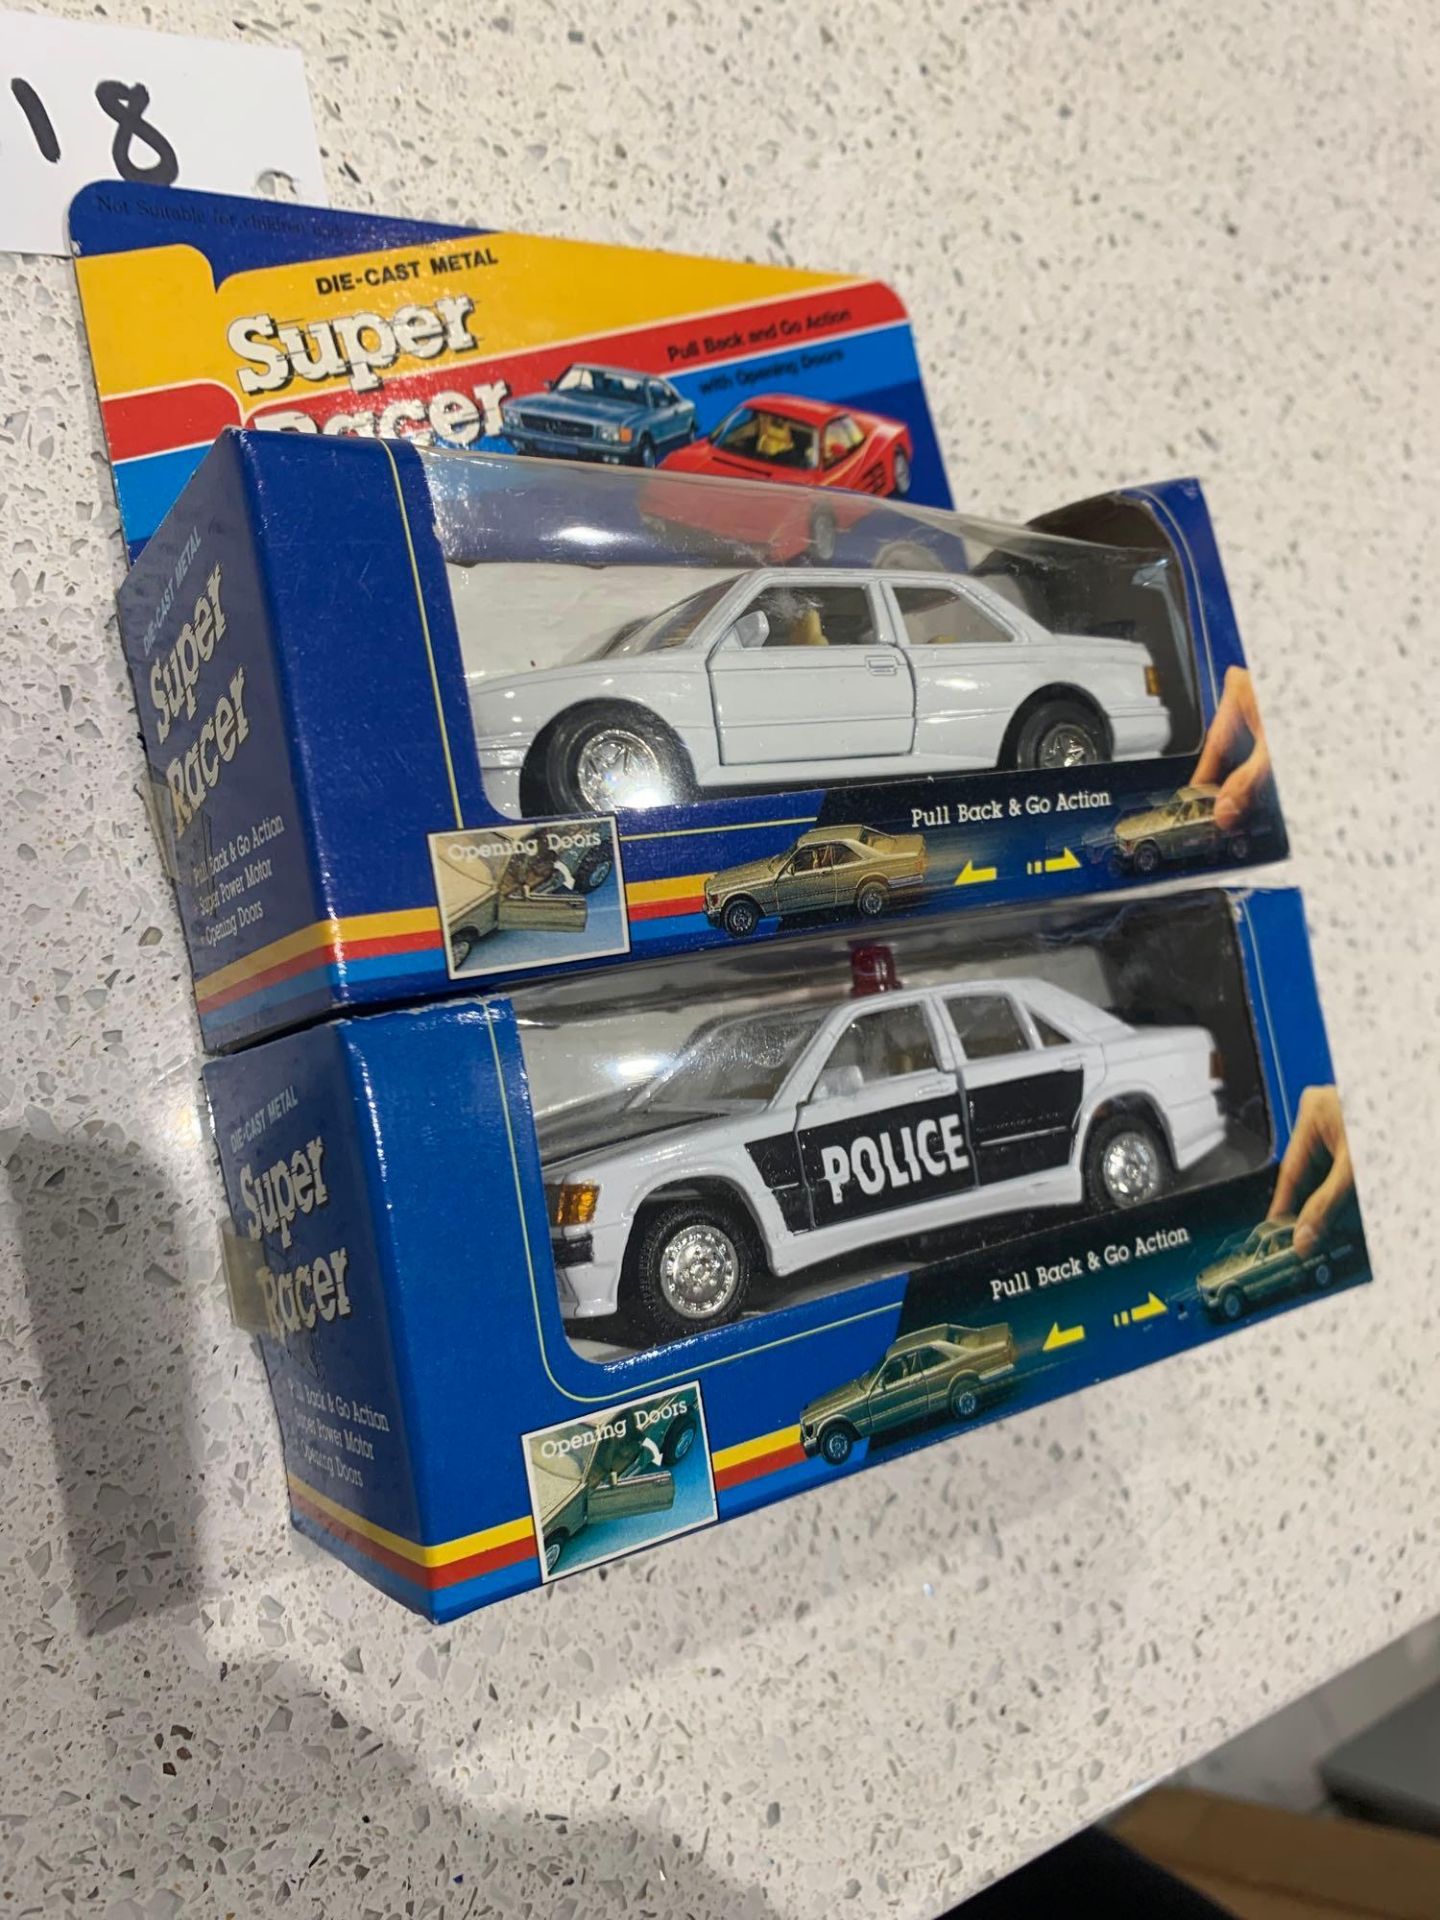 2 X Super Racer Mercedes Benz Models I With Police Markings - Image 3 of 4